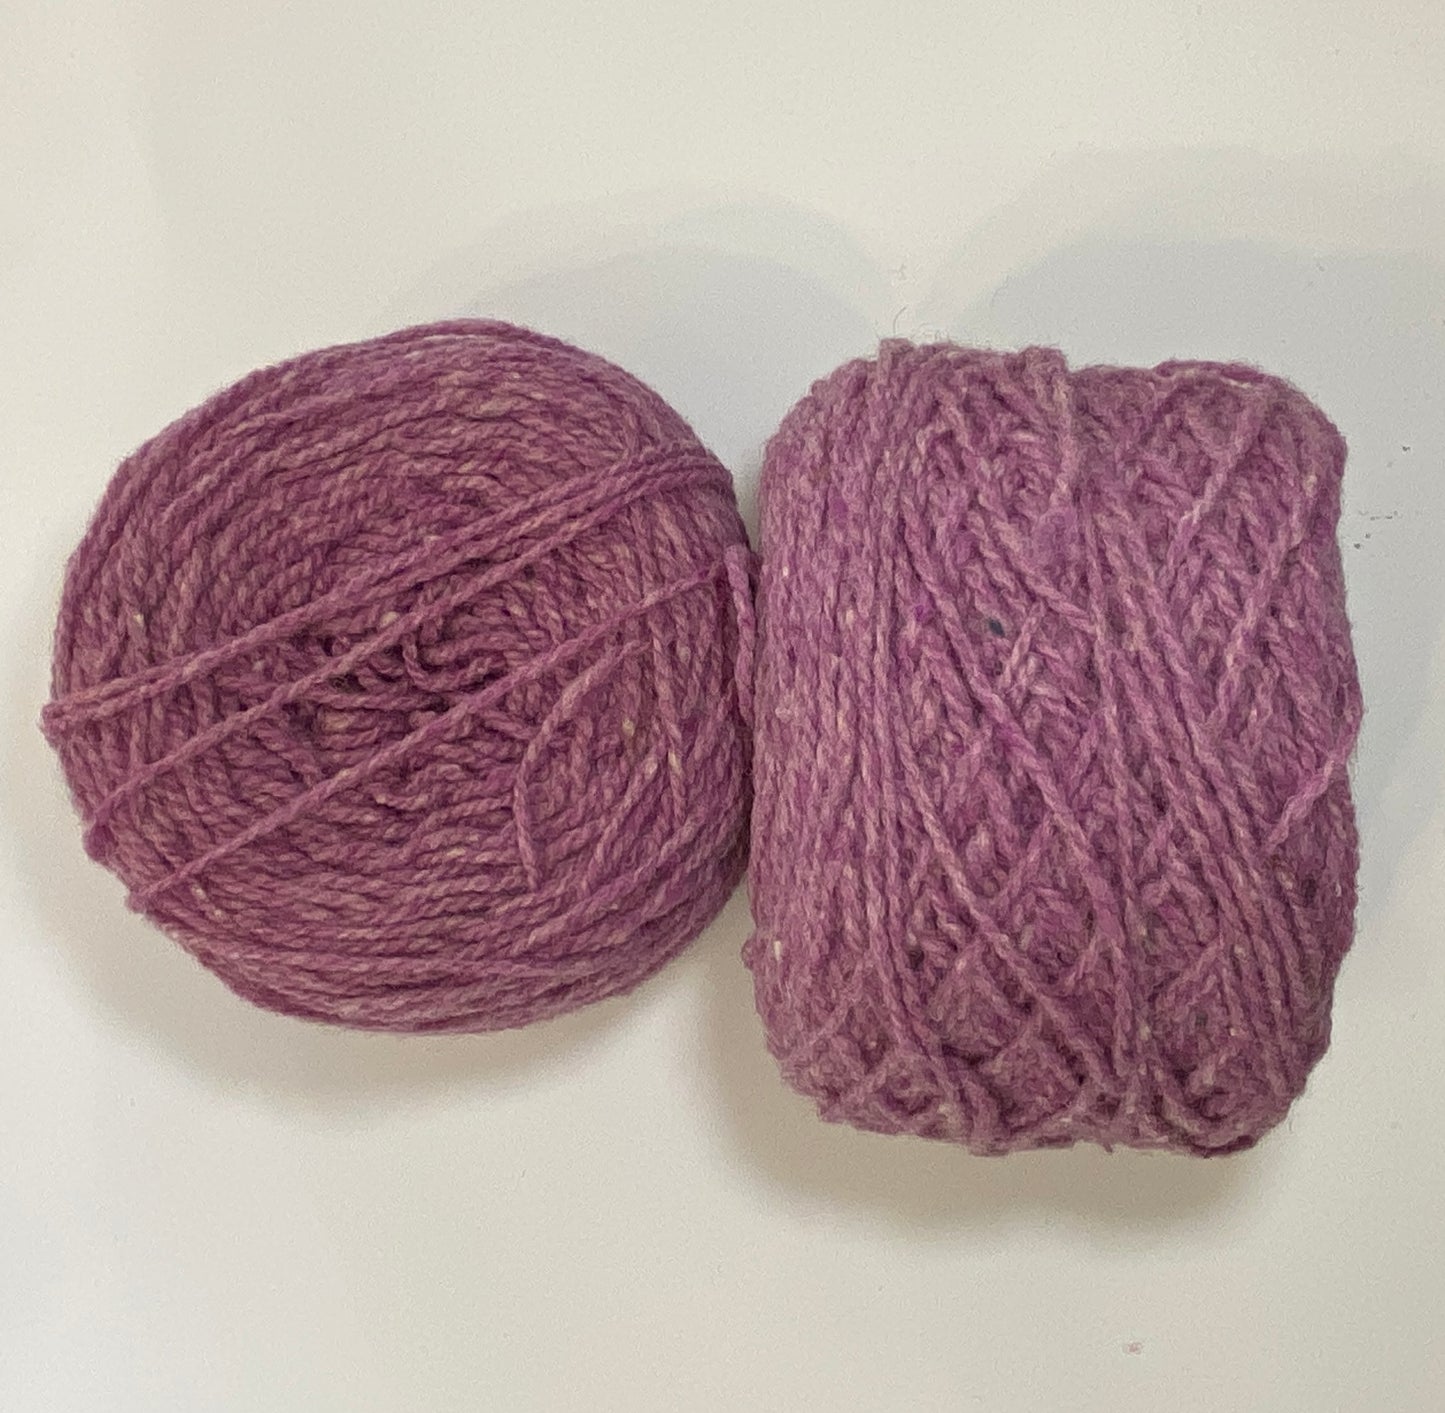 Chester Farms Pure Wool Yarn in Plum Heather: 5 Cakes, 1 Ball